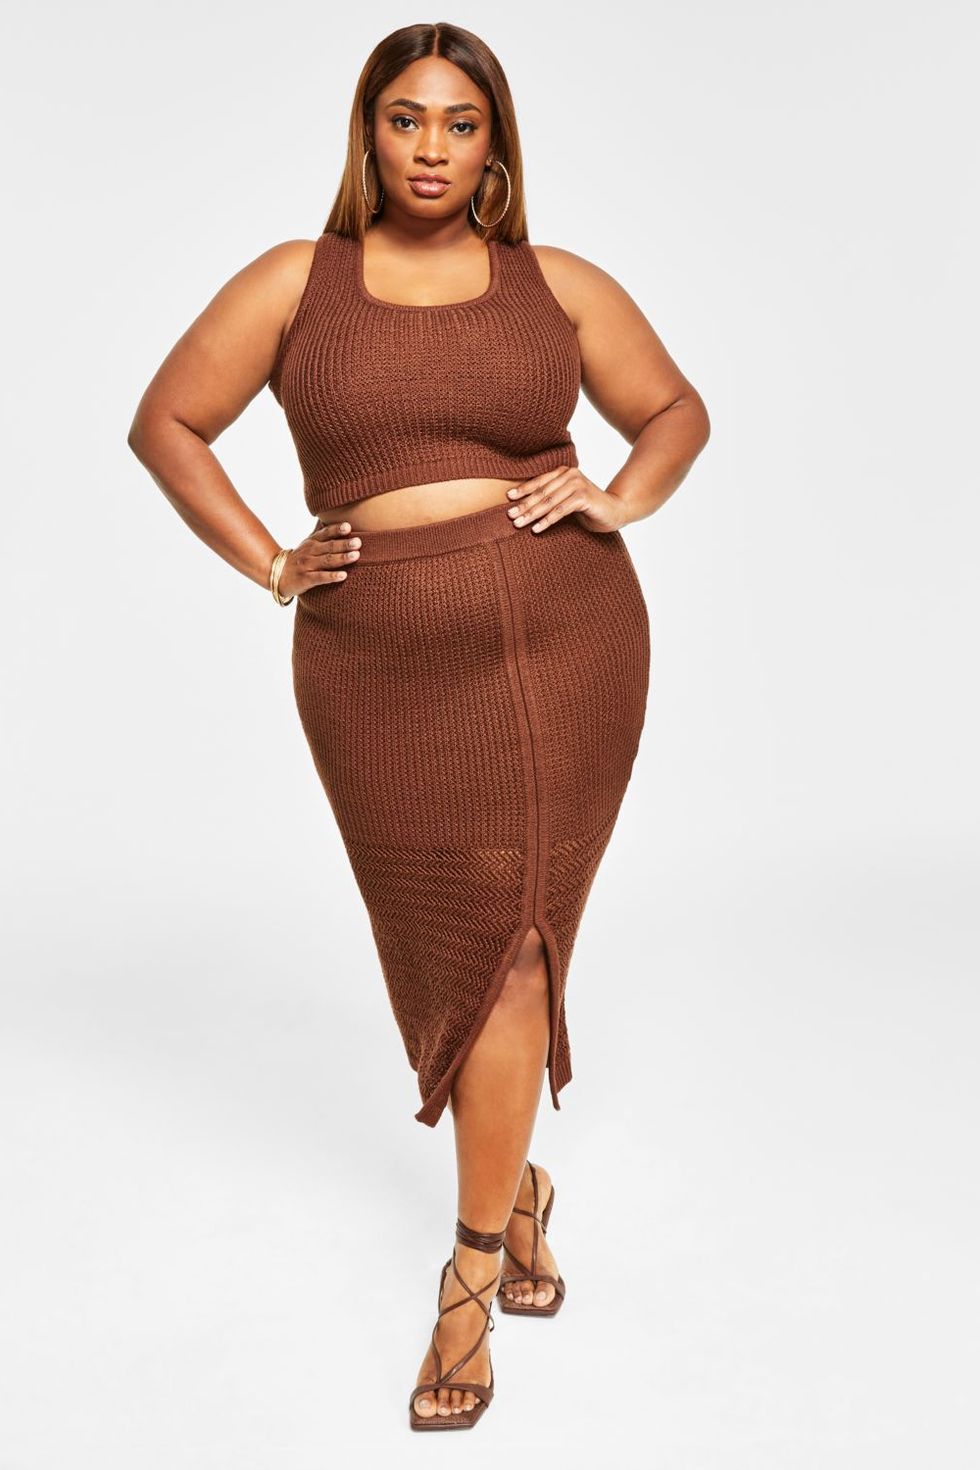 Affordable and Fashionable: Shein Plus Size Dresses - Victoria Wardrobe